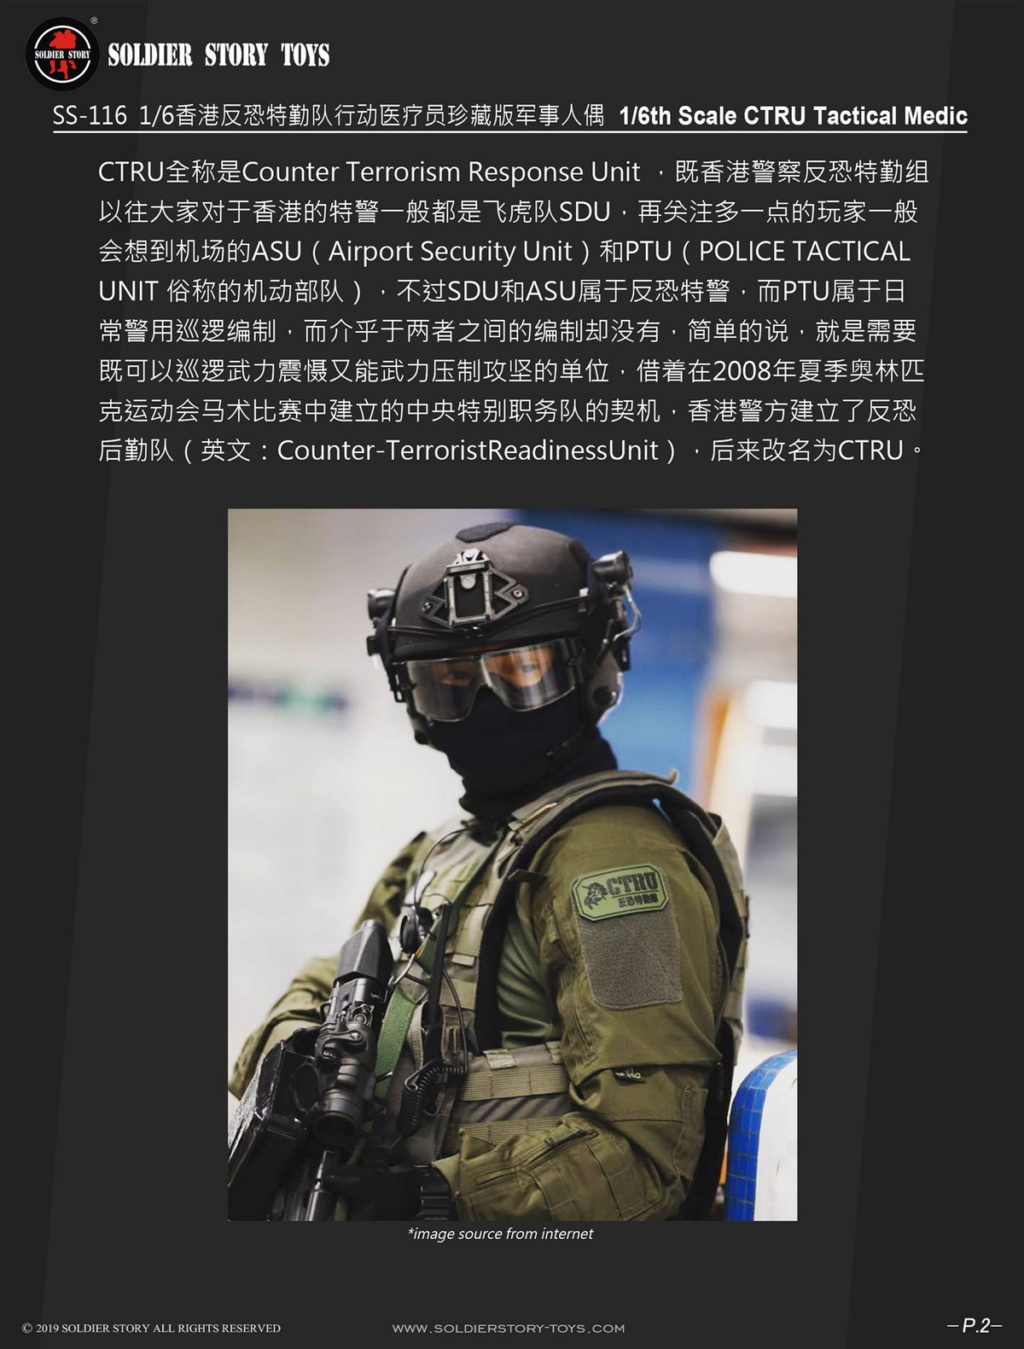 XiaoZhang - NEW PRODUCT: SoldierStory: 1/6 Hong Kong anti-terrorism secret service team CTRU - Mobile medical staff "Xiao Zhang" (SS116) updated full map 23394810